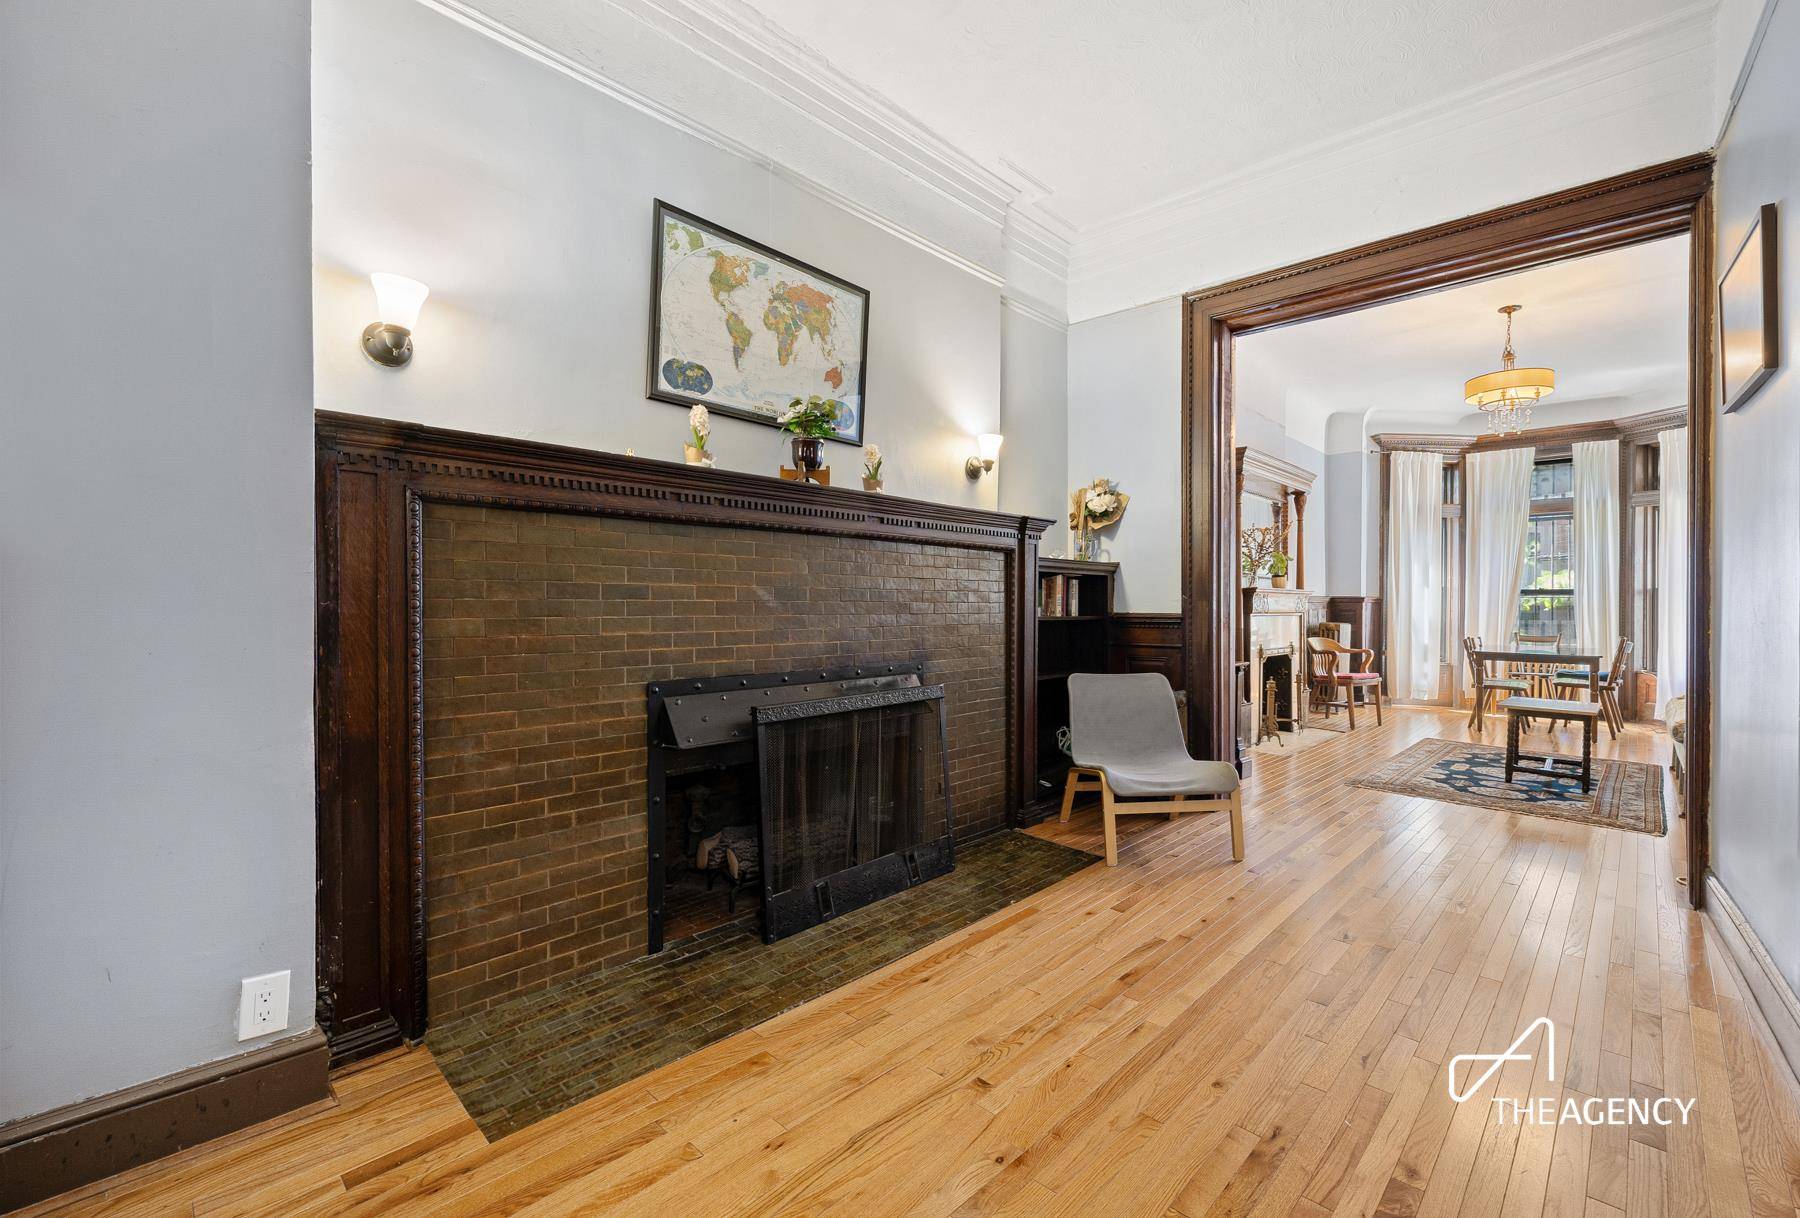 Charming Renaissance Revival Townhouse with Stunning DetailsDiscover the charm and elegance of this 20 ft wide brownstone, ready to be transformed into your dream home or investment property.